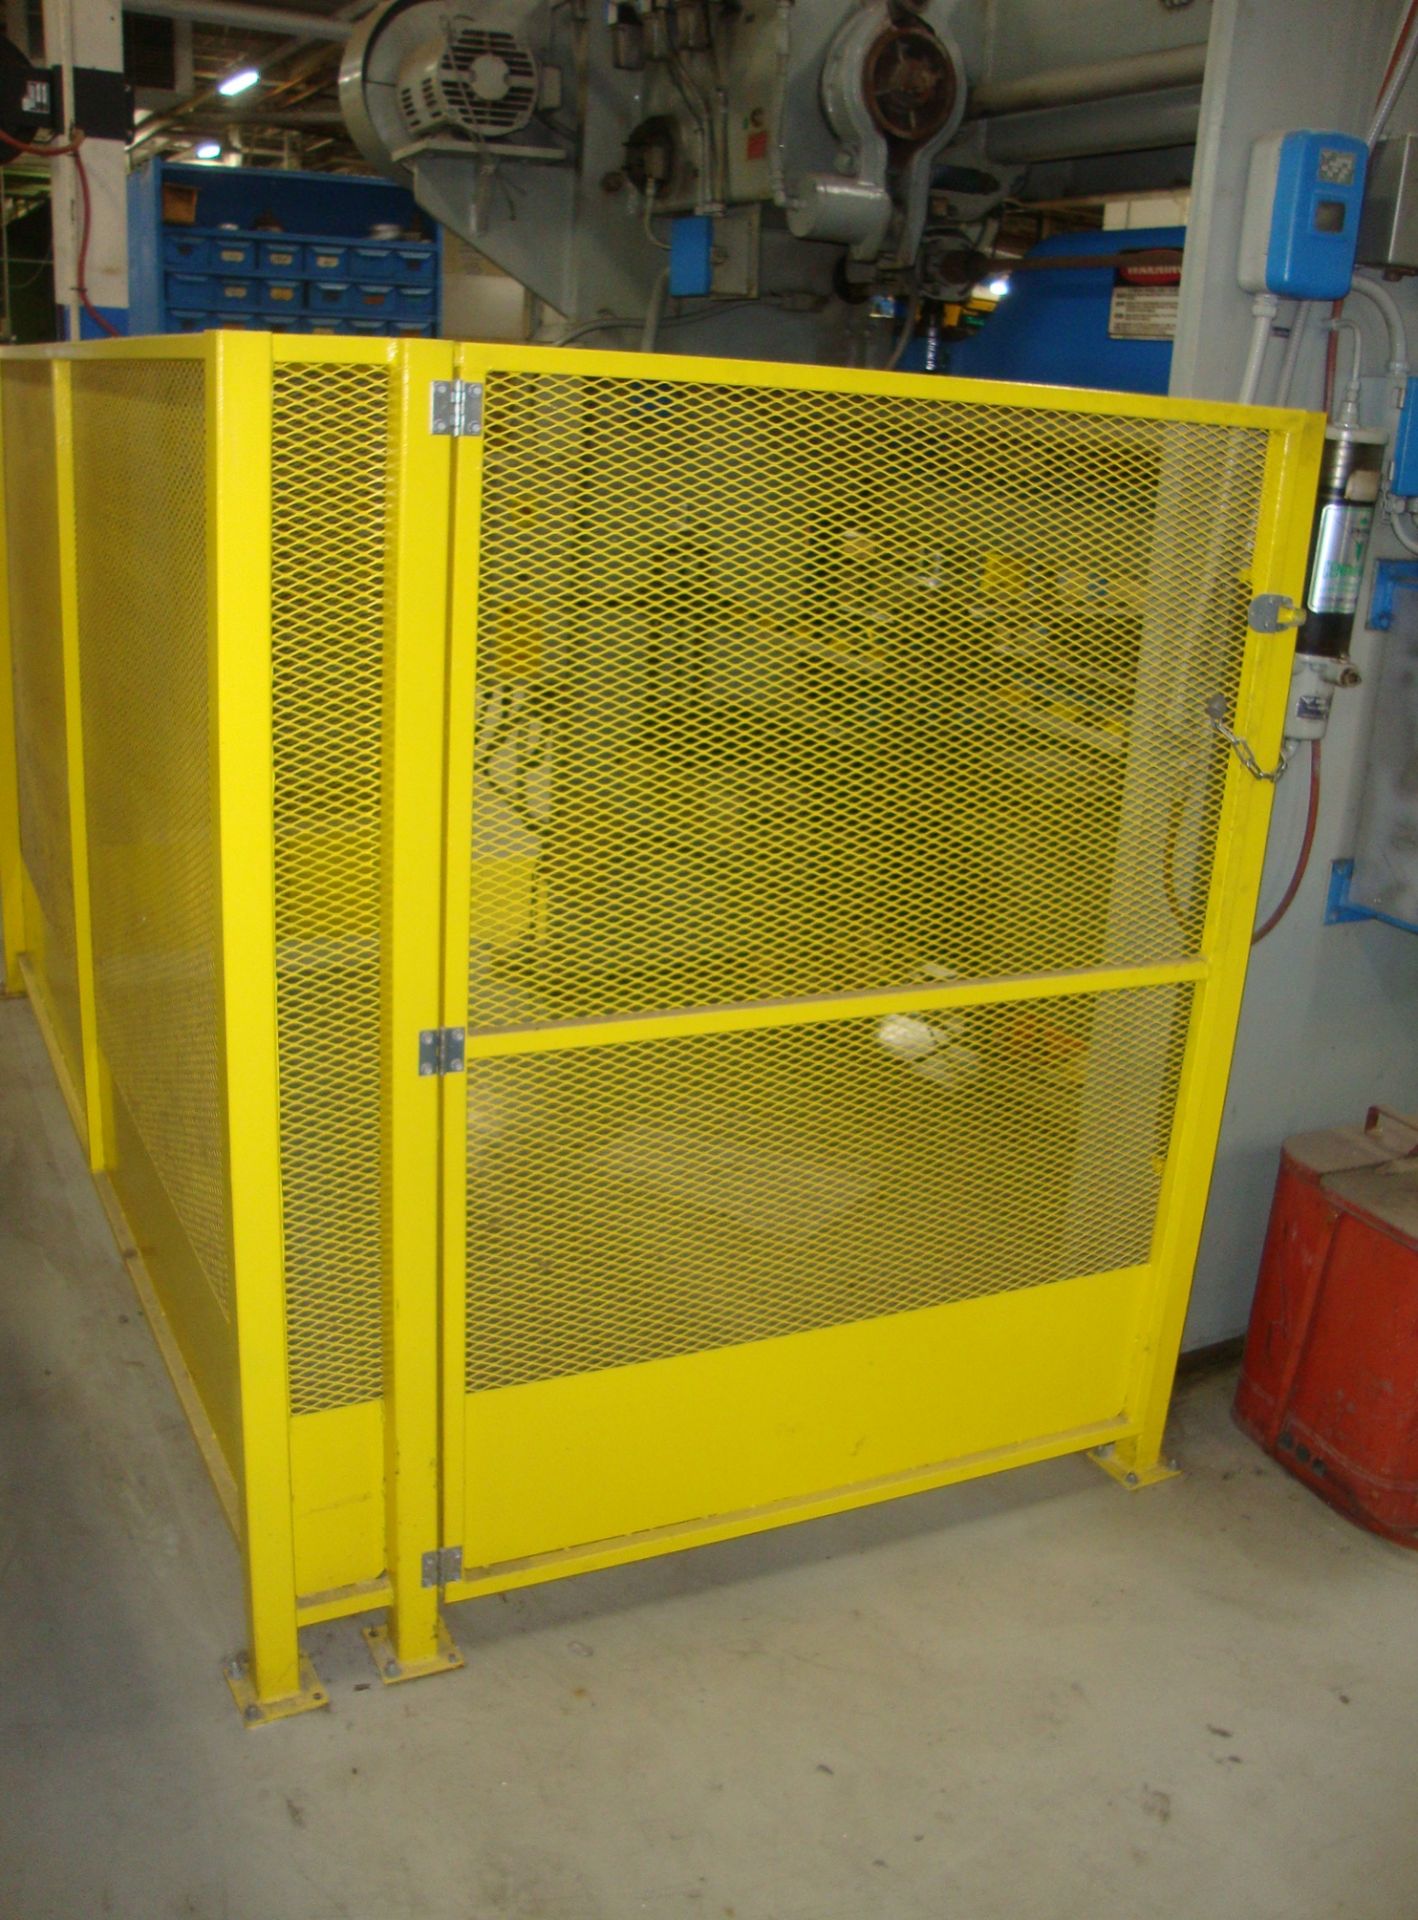 Steel Railing Safety Enclosure, approx. 53" x 104" x 42" x 60" tall - Image 2 of 3